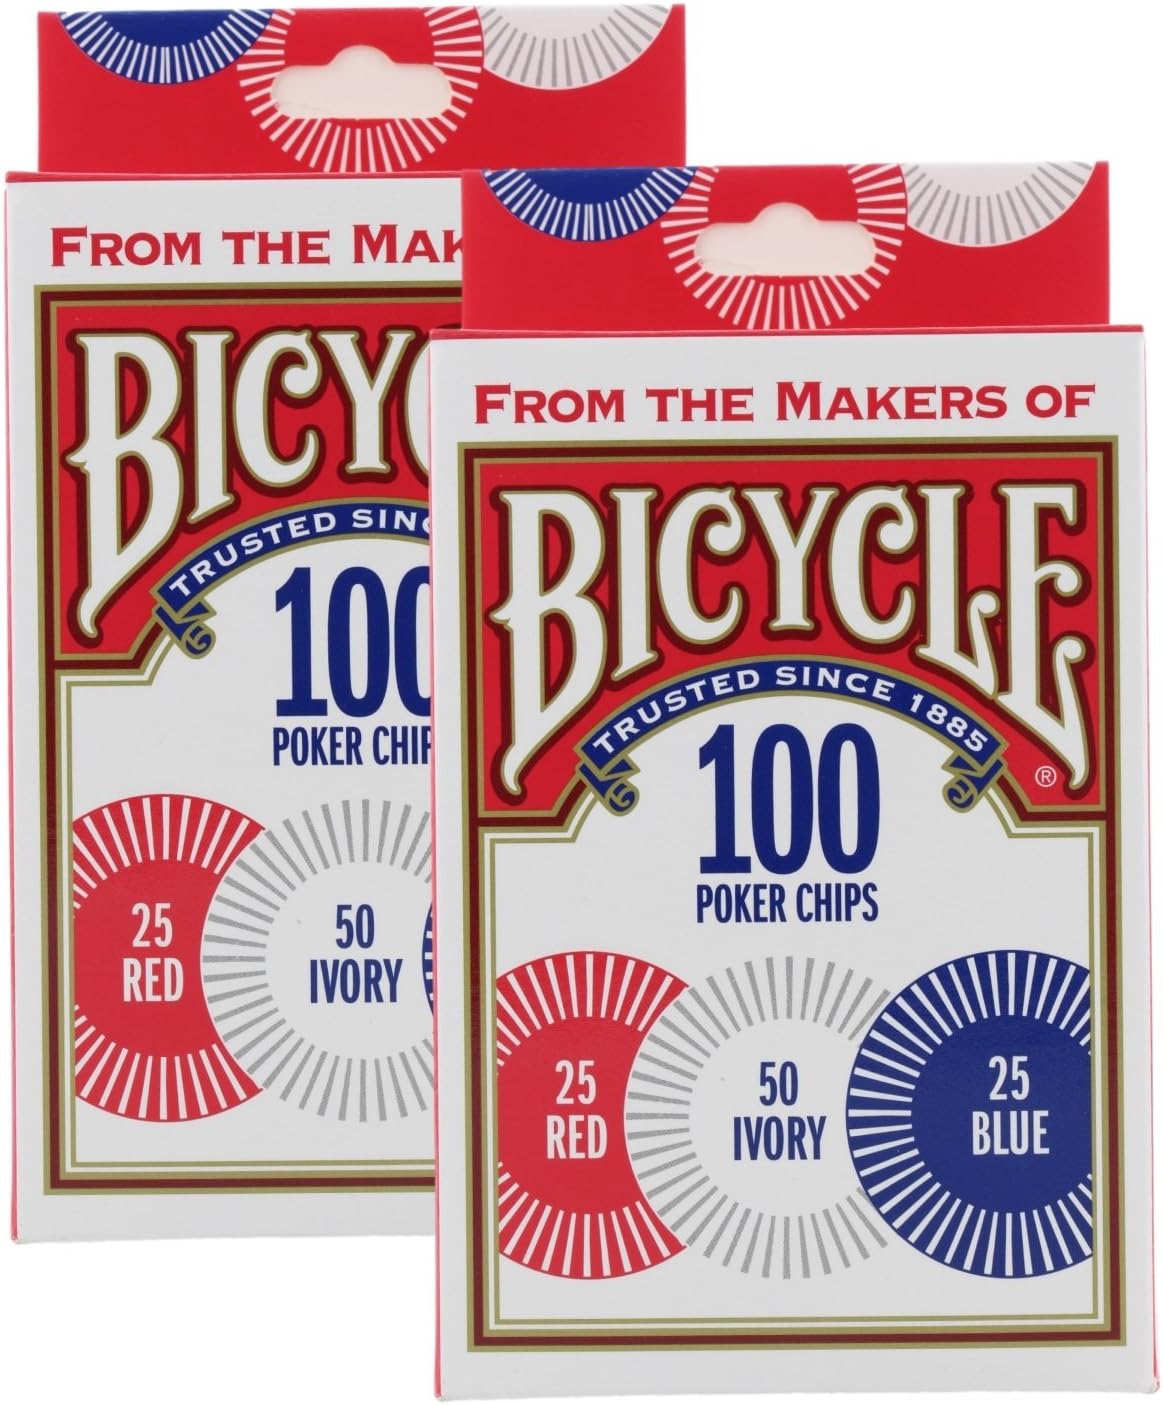 Bicycle Poker Chips - 100 Count with 3 Colors (2 Pack)